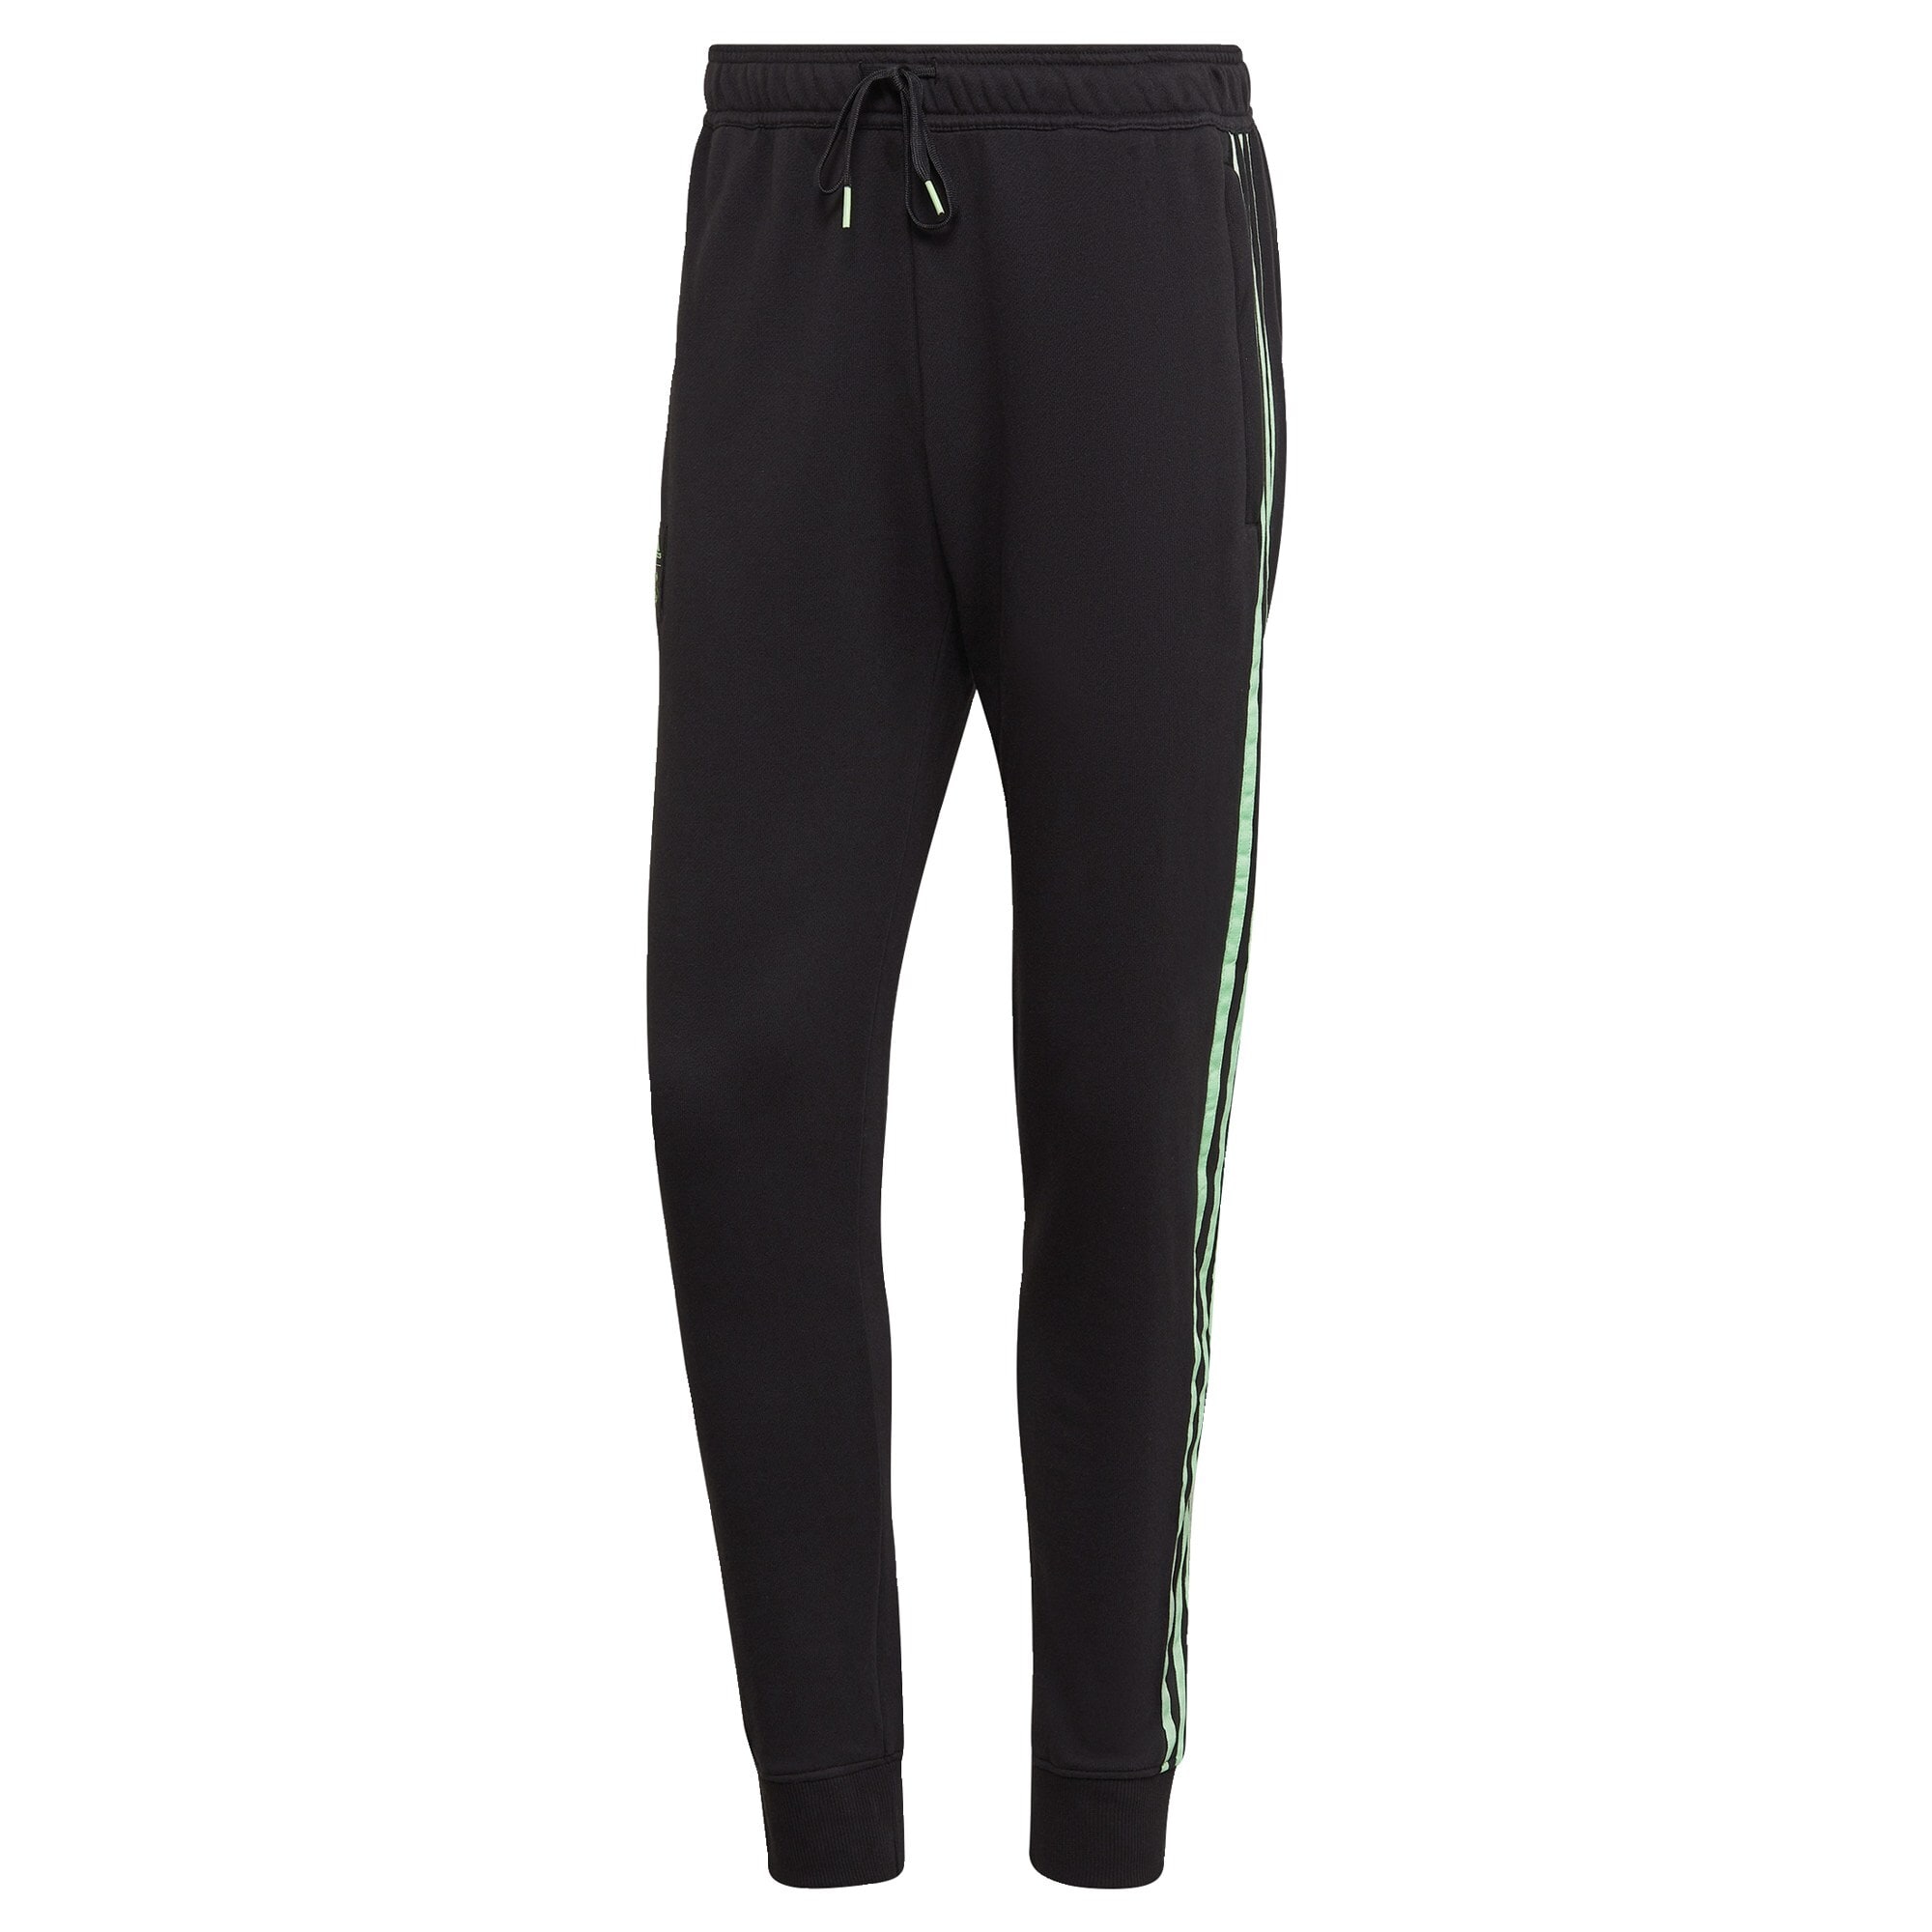 adidas, Real Madrid Chinese Story Pants Adults, Carbon